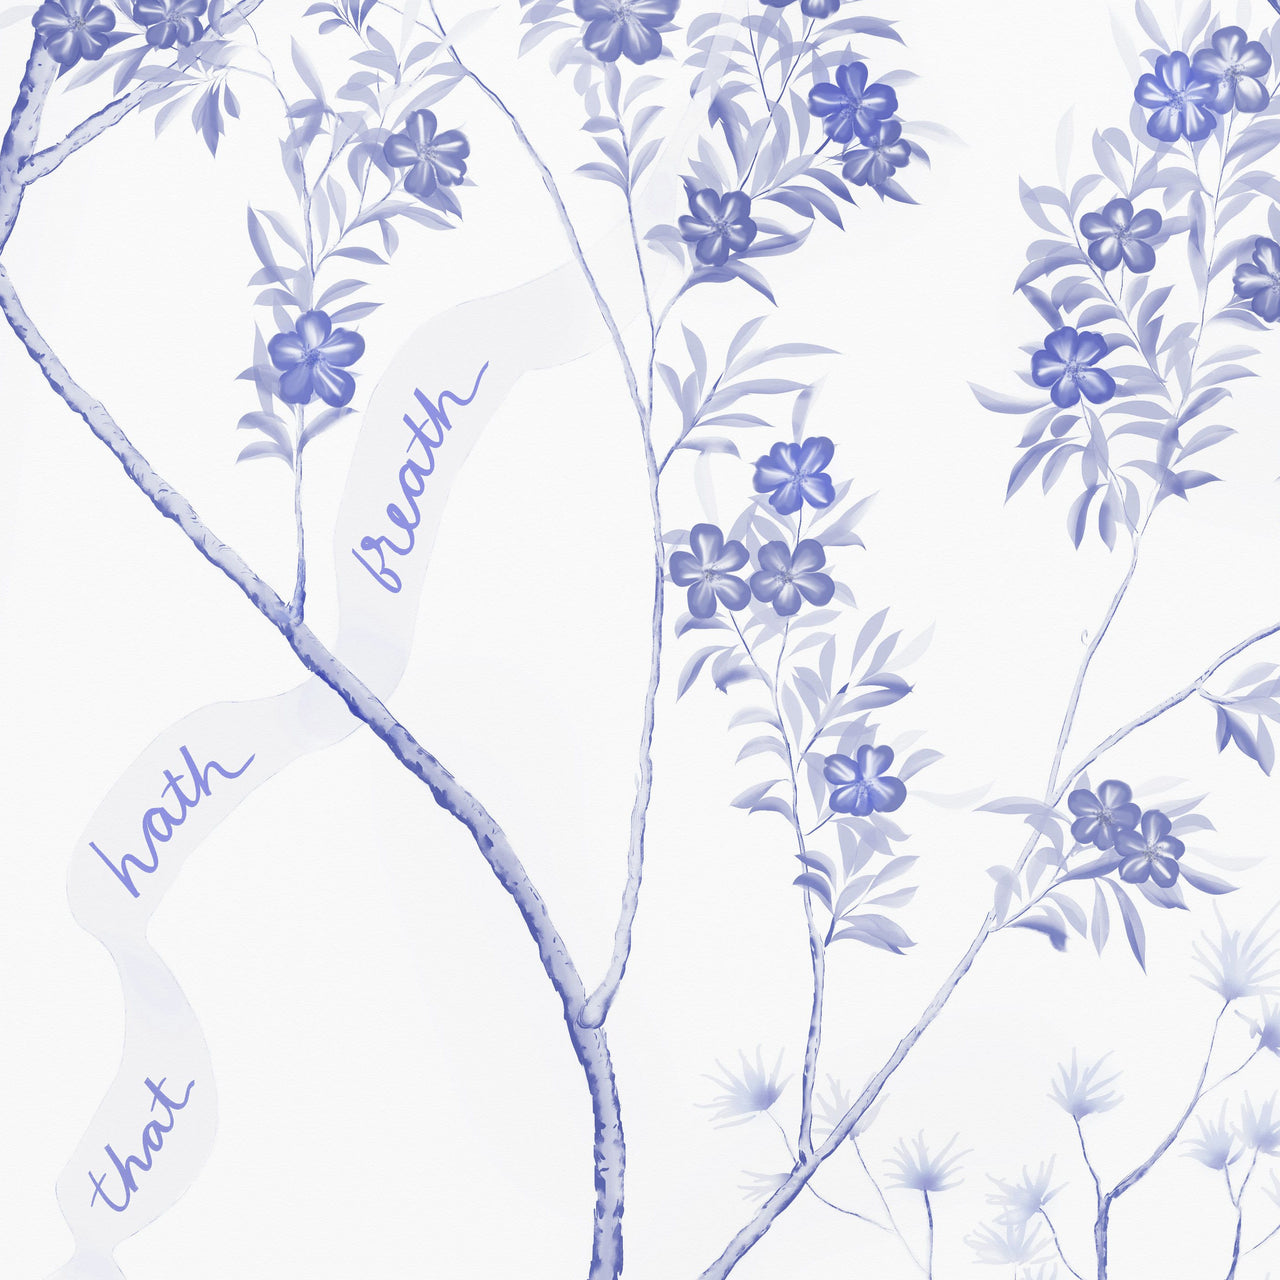 Detail from "Praise Ye the LORD Chinoiserie" - Tabletop Print in Dutch Blue